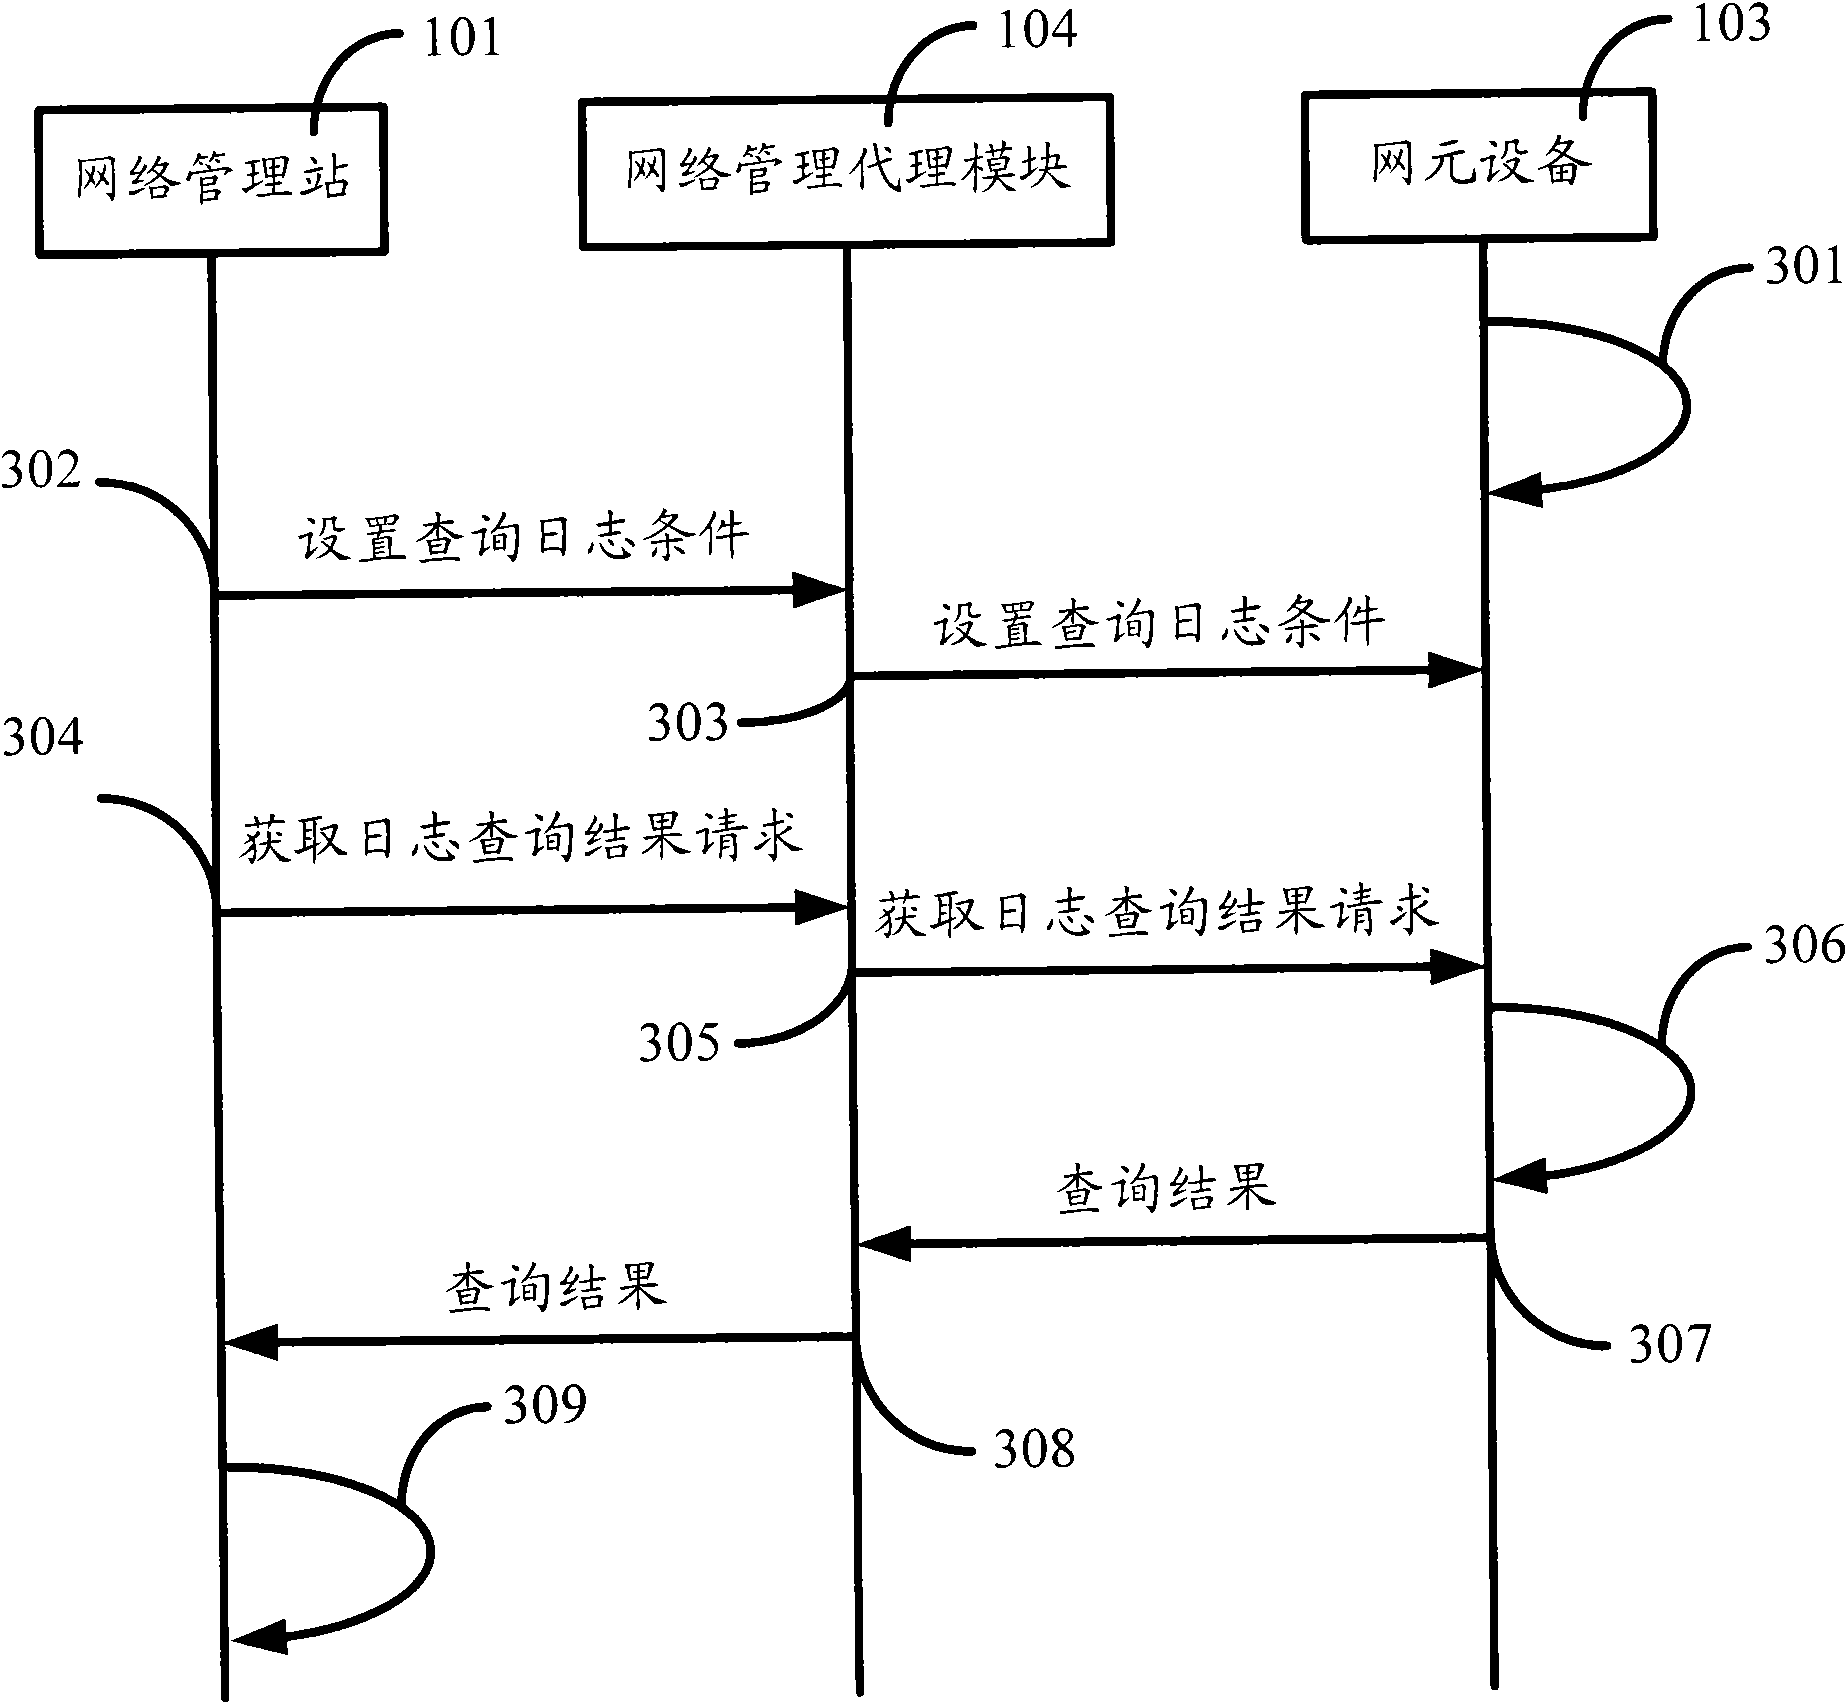 Method of network element equipment log management and device